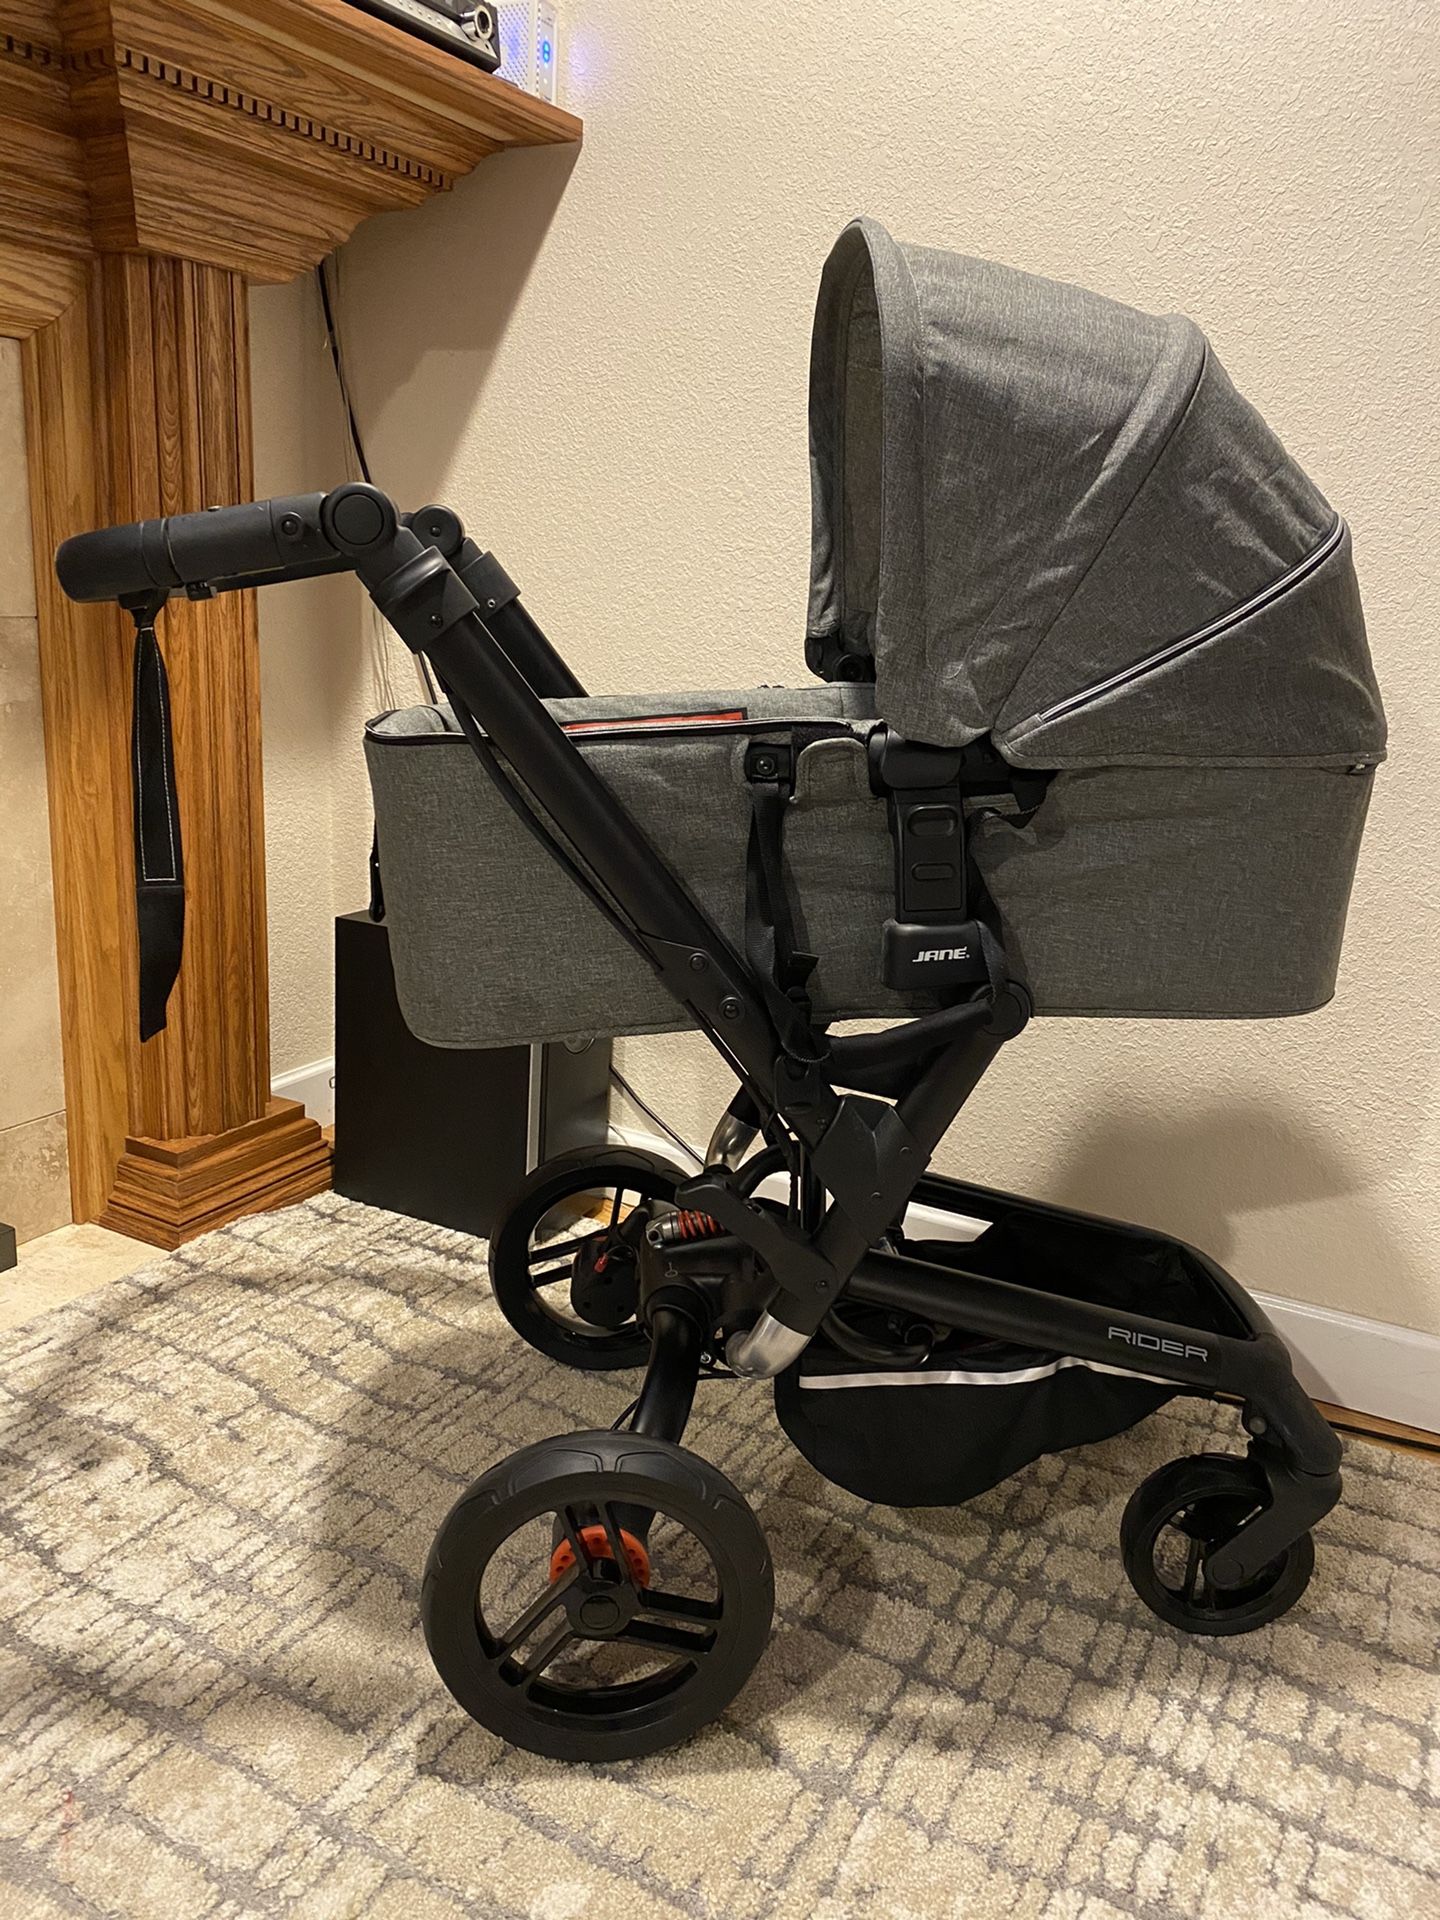 Jane Rider Stroller With Bassinet , Maxi Cosi Car Seat And Adoptor